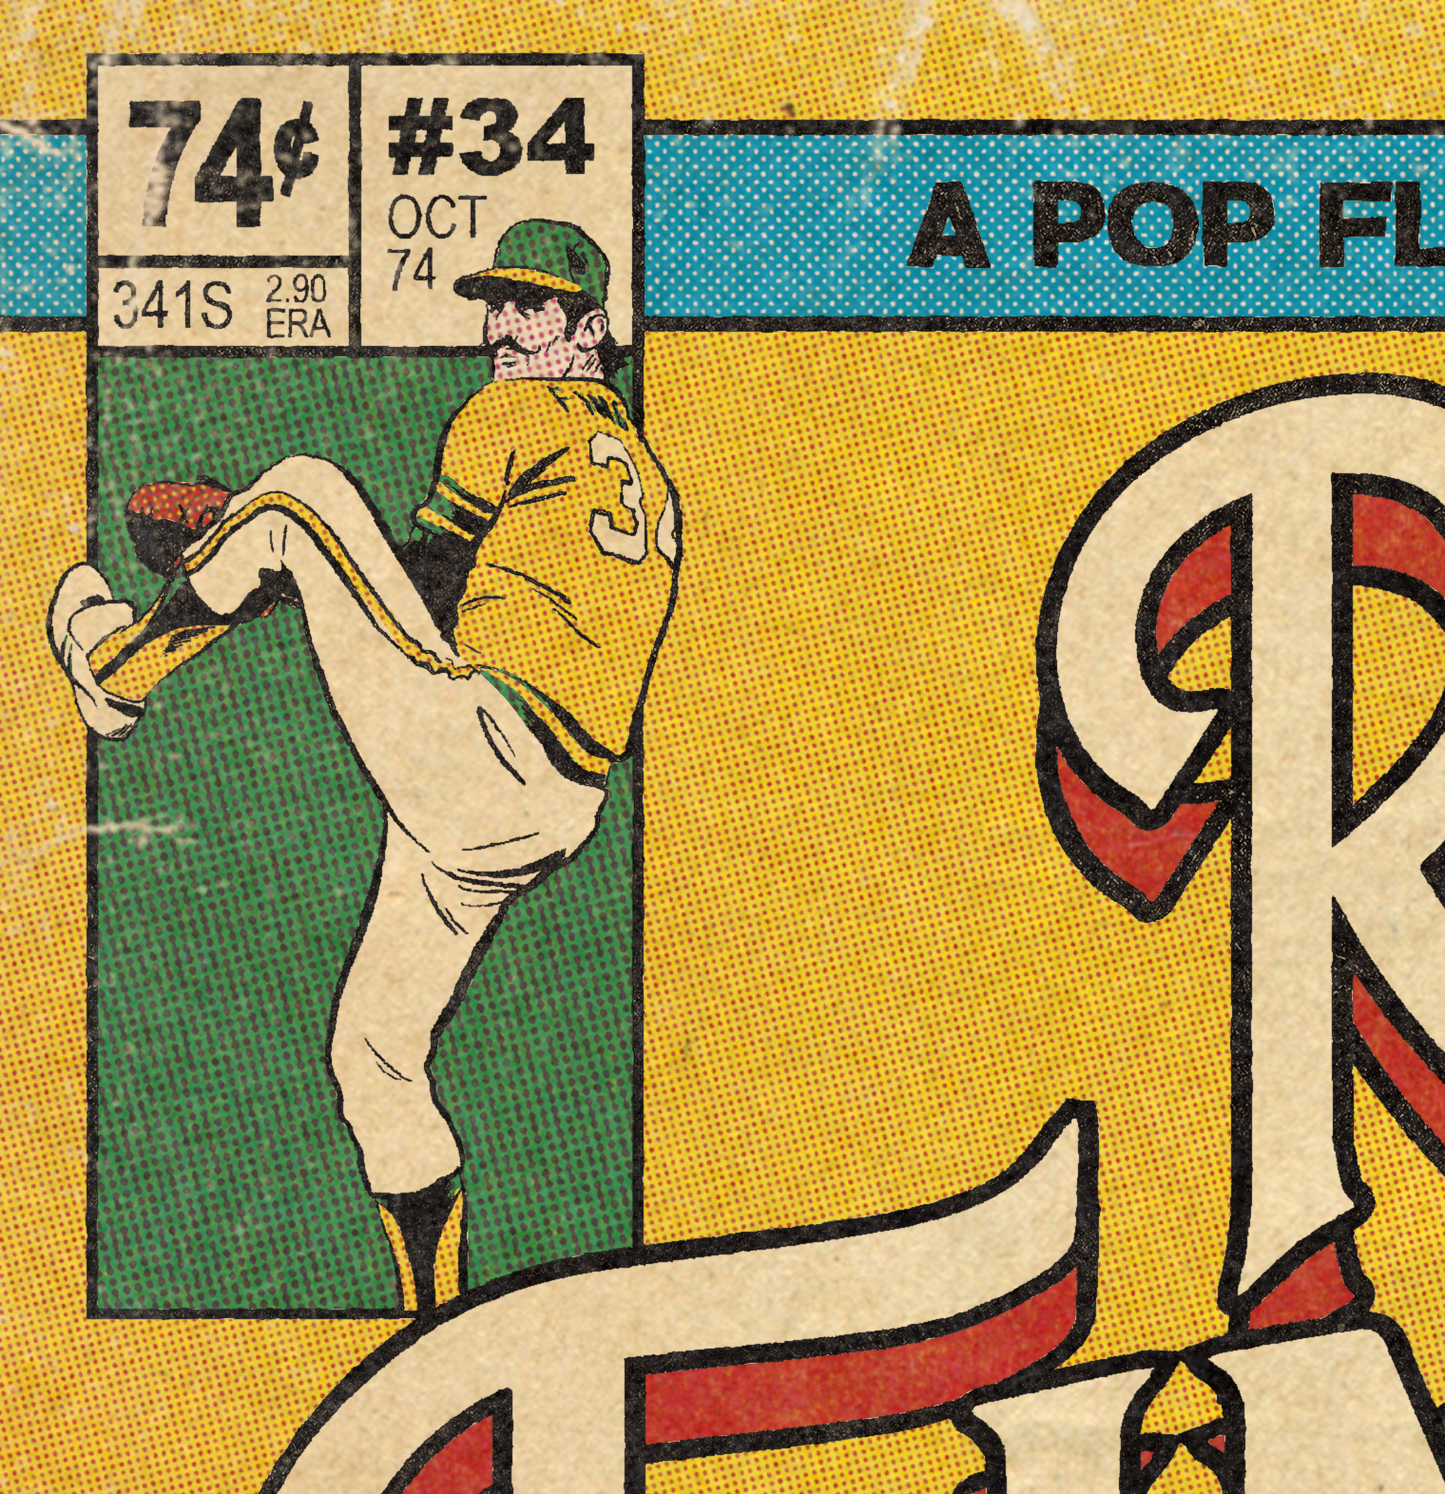 52. (SOLD OUT) "Rollie Fingers" 7" x 10.5" Art Print